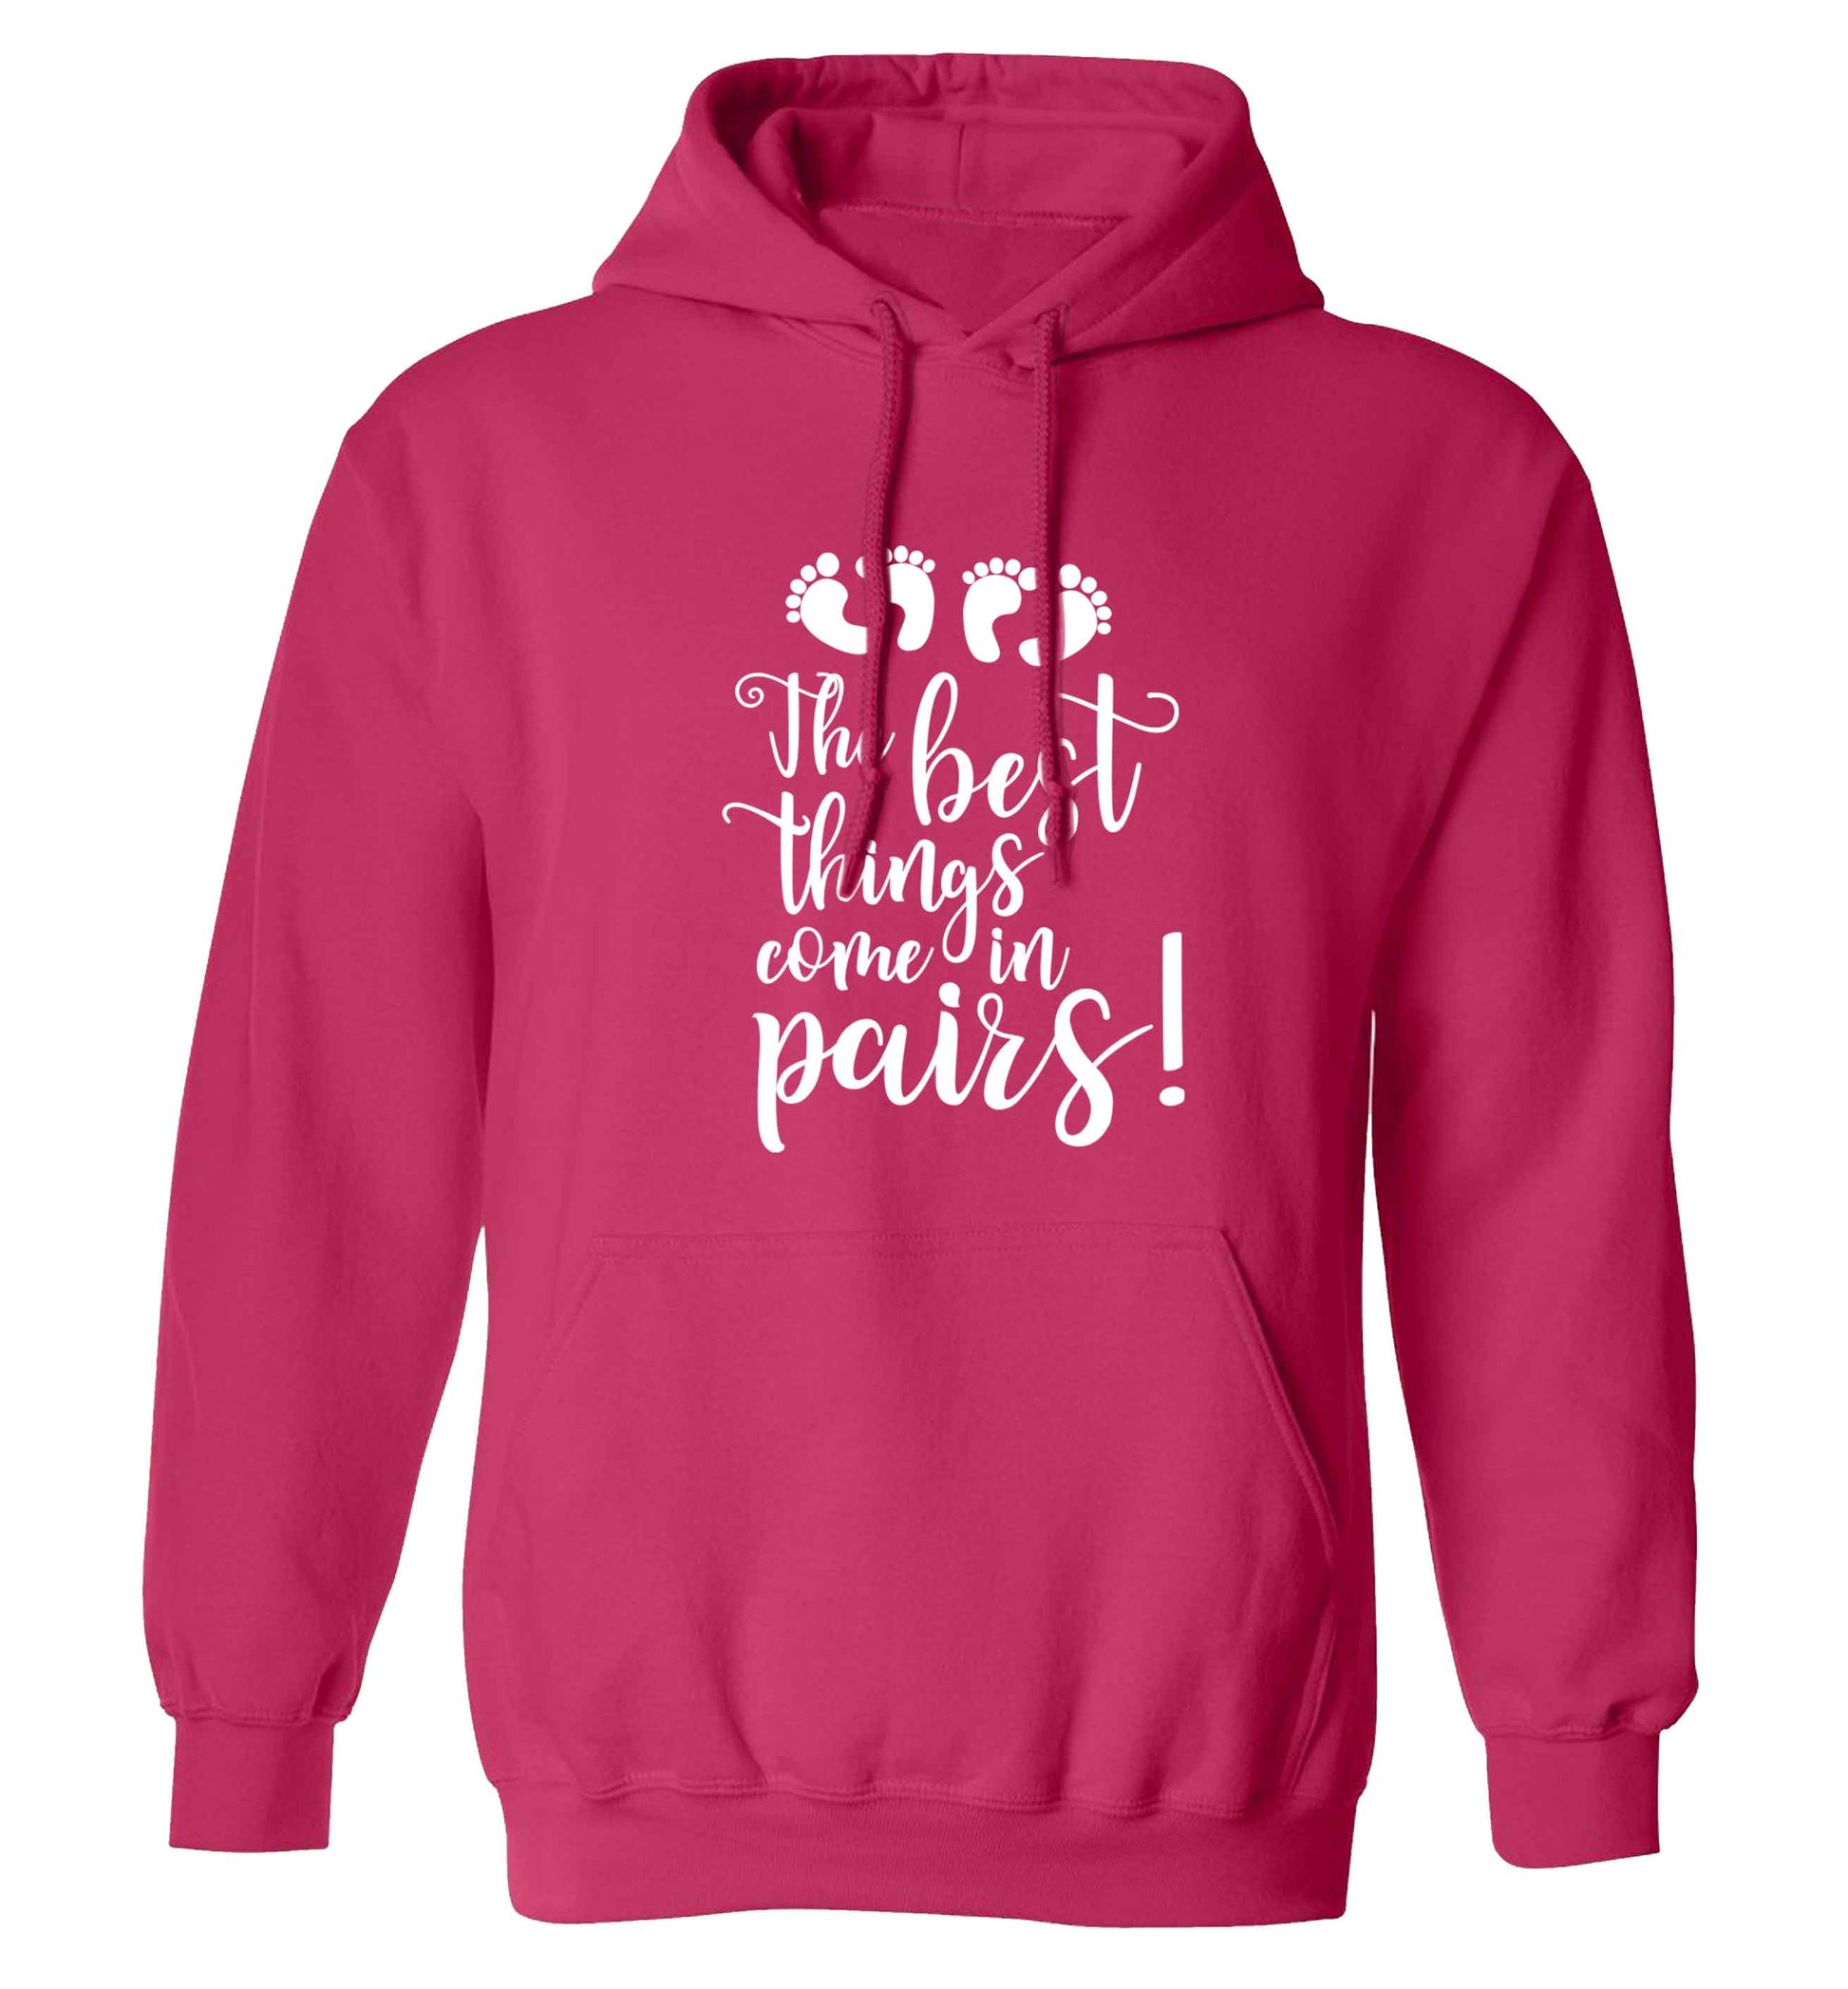 The best things come in pairs! adults unisex pink hoodie 2XL